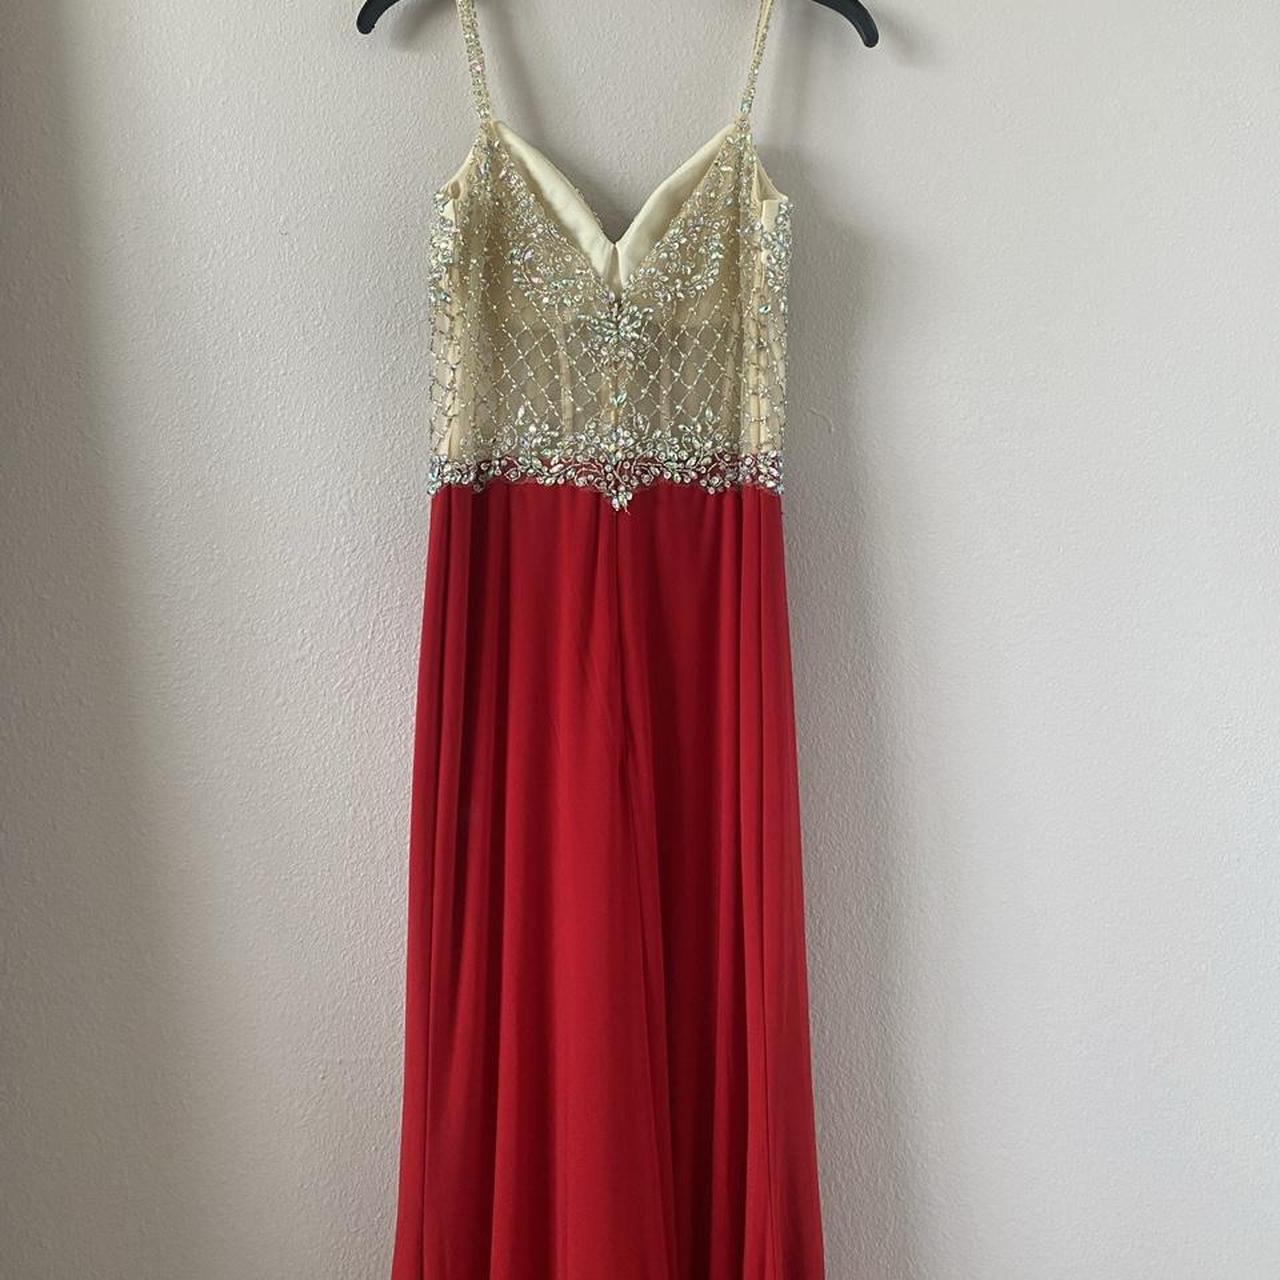 Product Image 3 - Red and Rhinestones Prom Dress